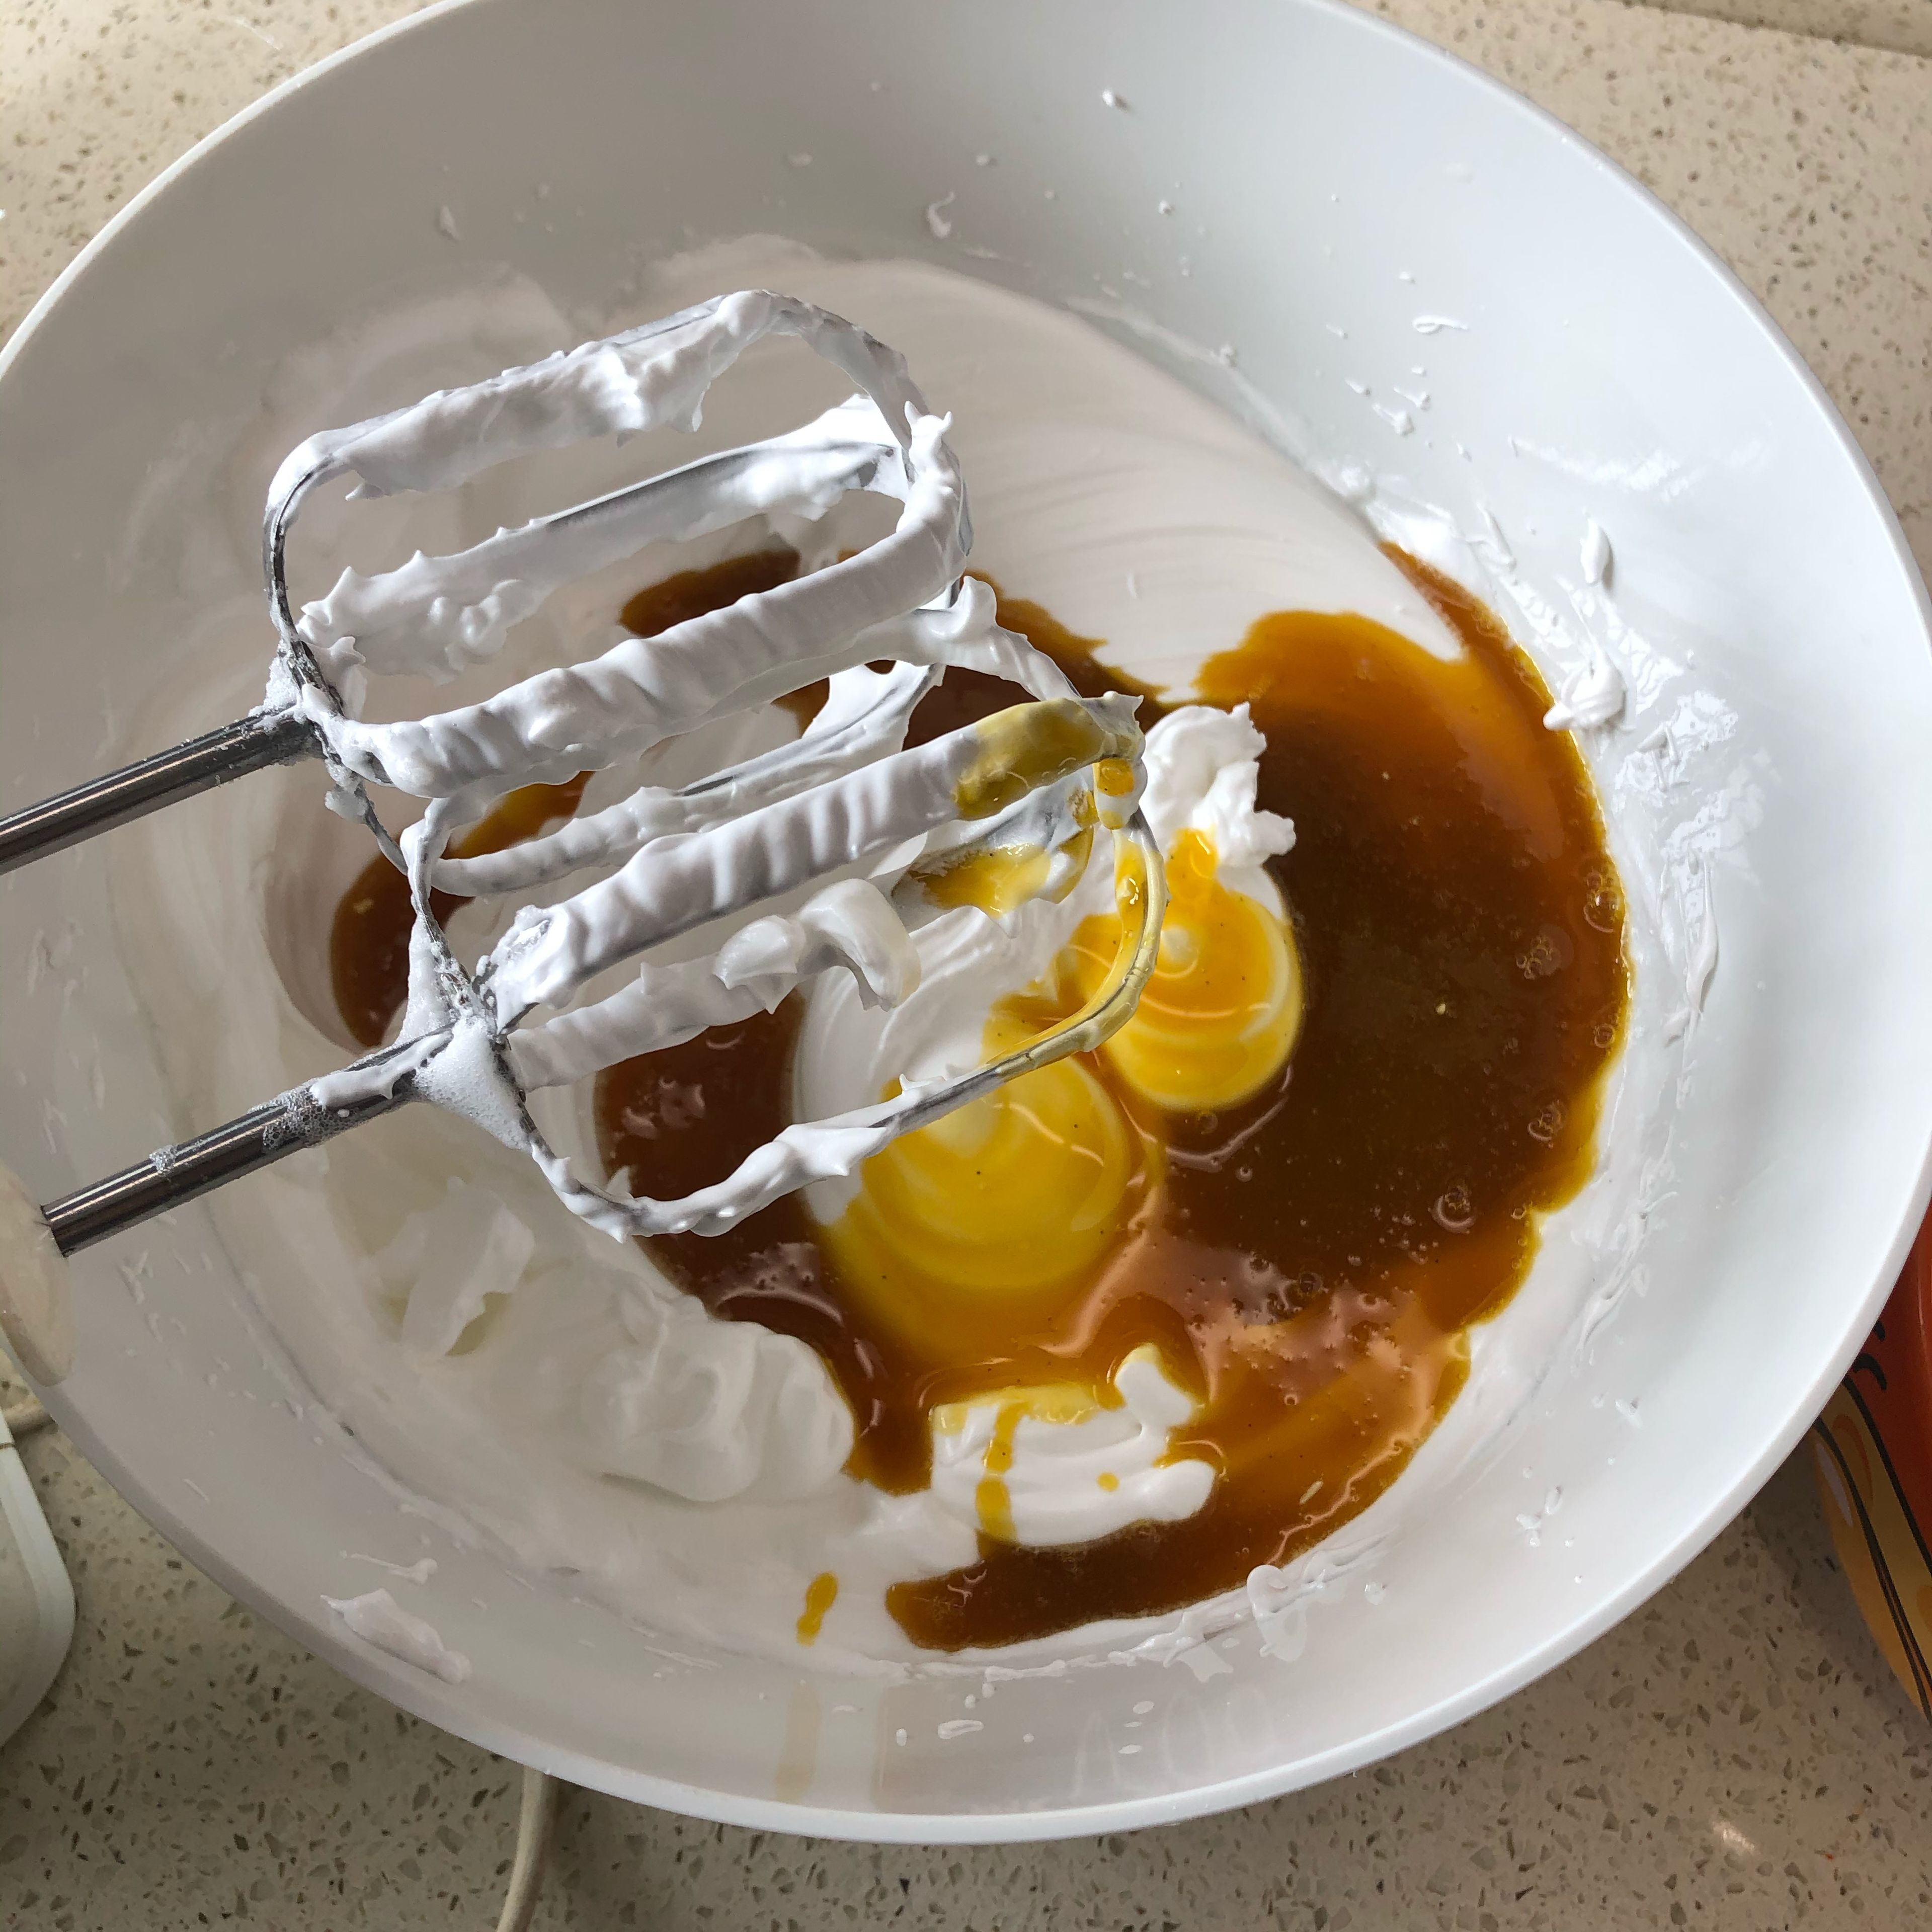 Add in egg yolk mixture and slowly beat till blend